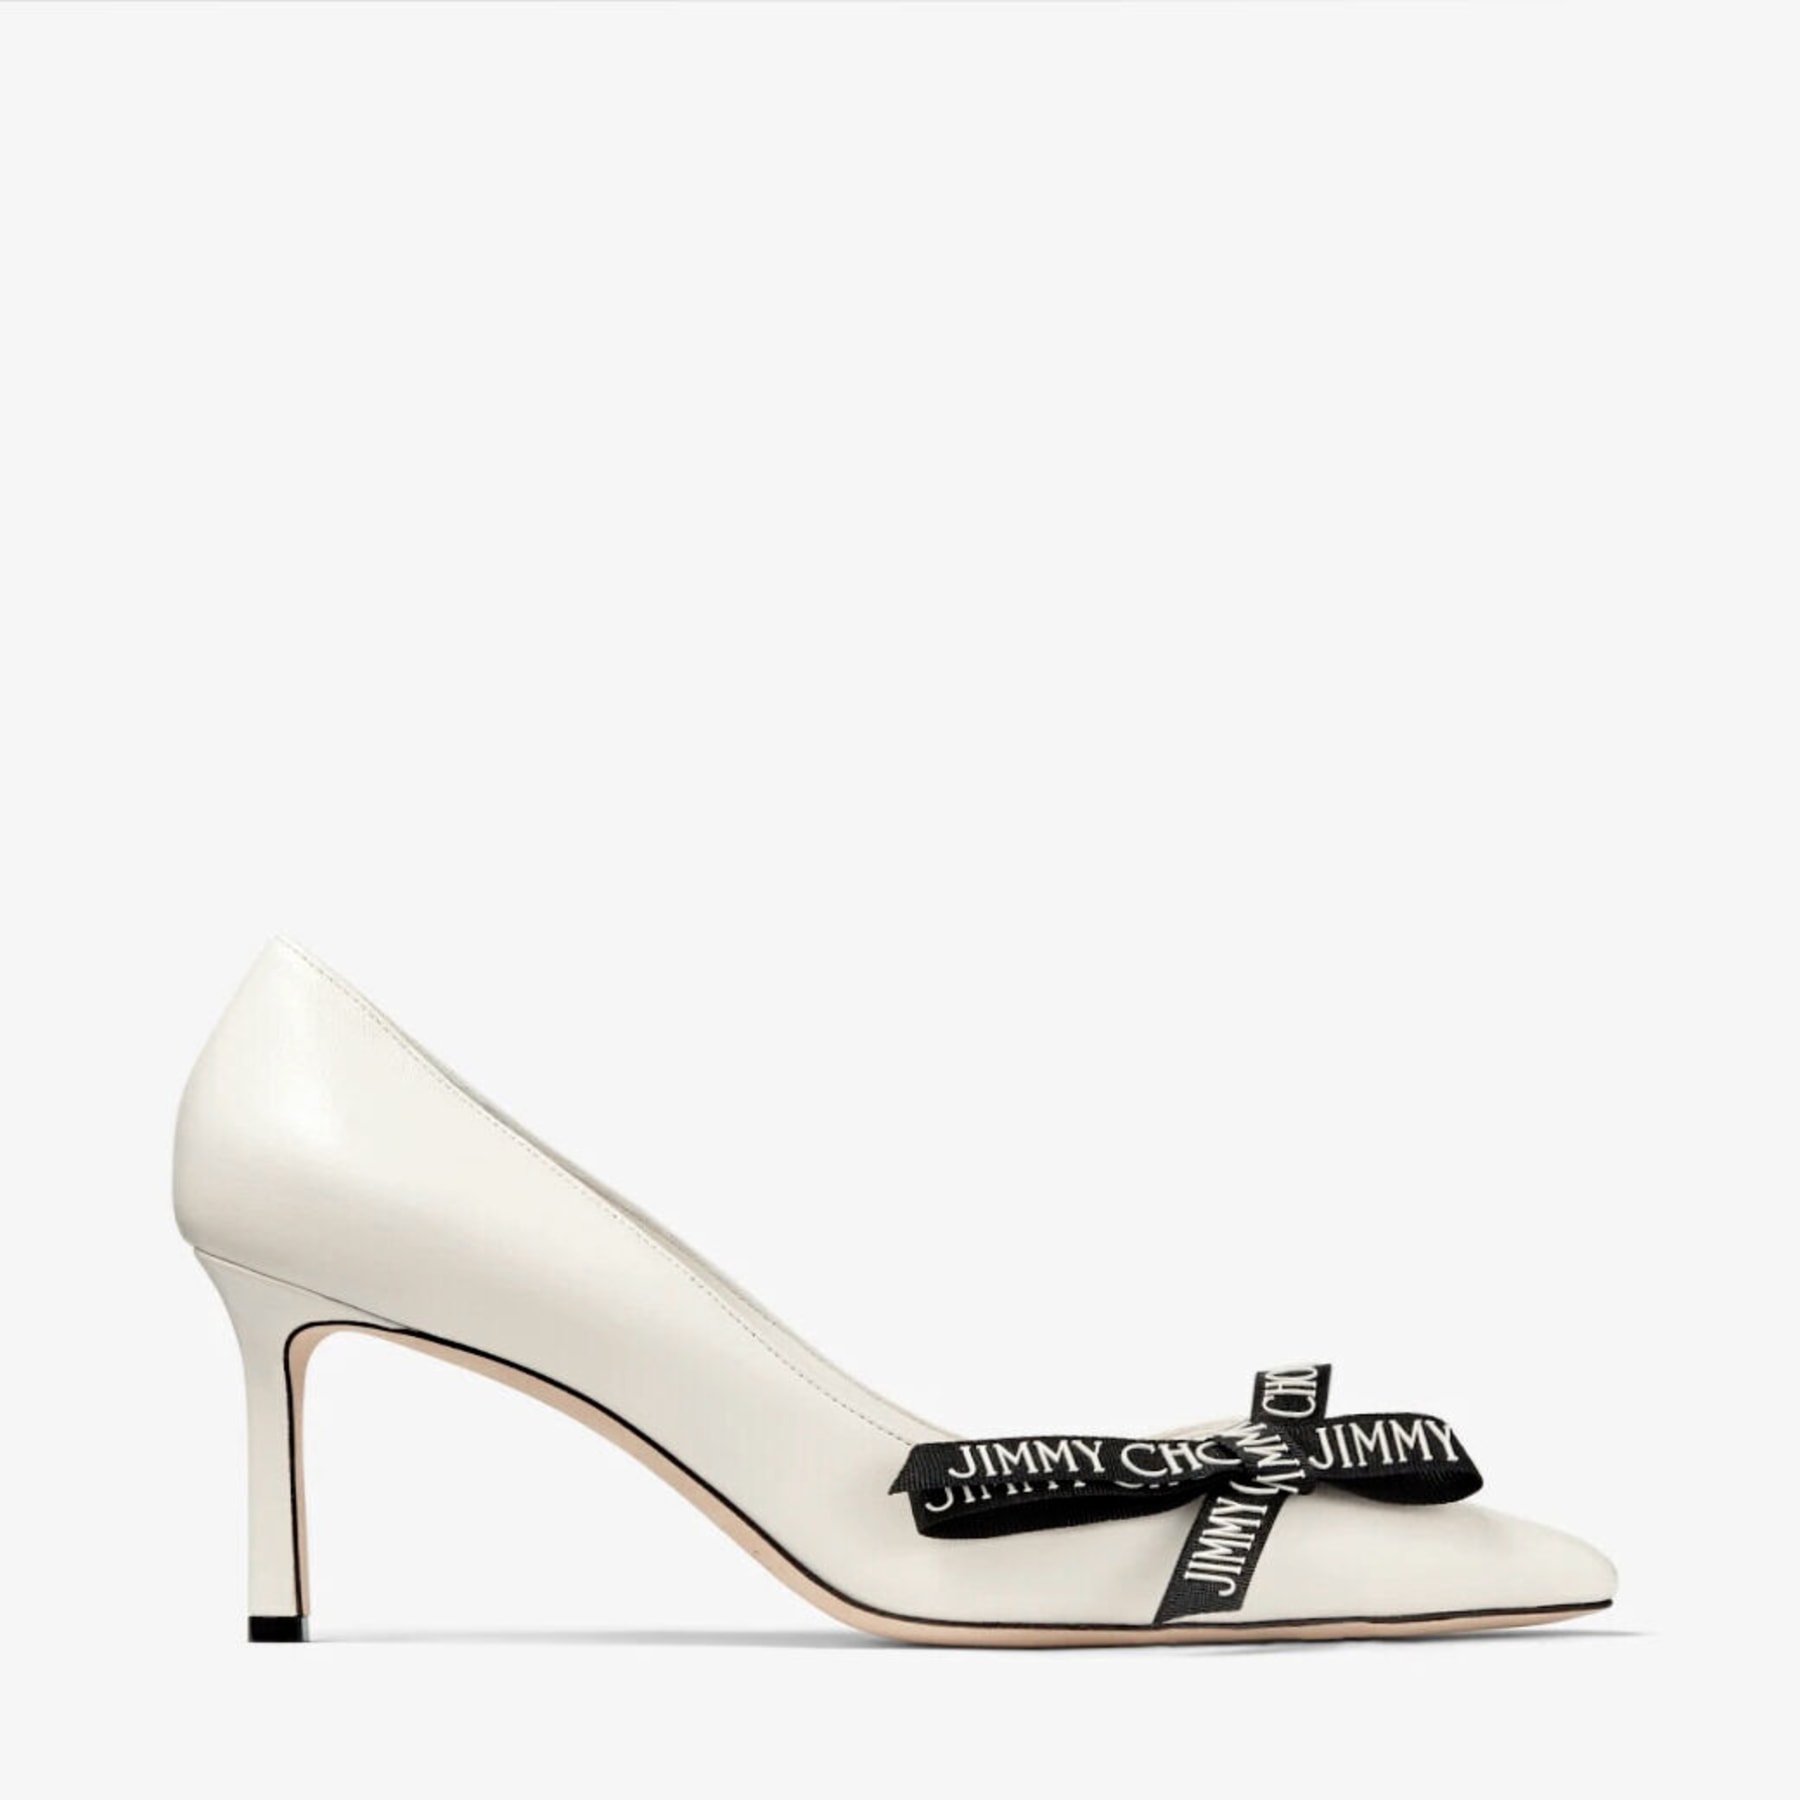 ROMY 60 | Latte Nappa Leather Pointed-Toe Pumps with Bow | Autumn 